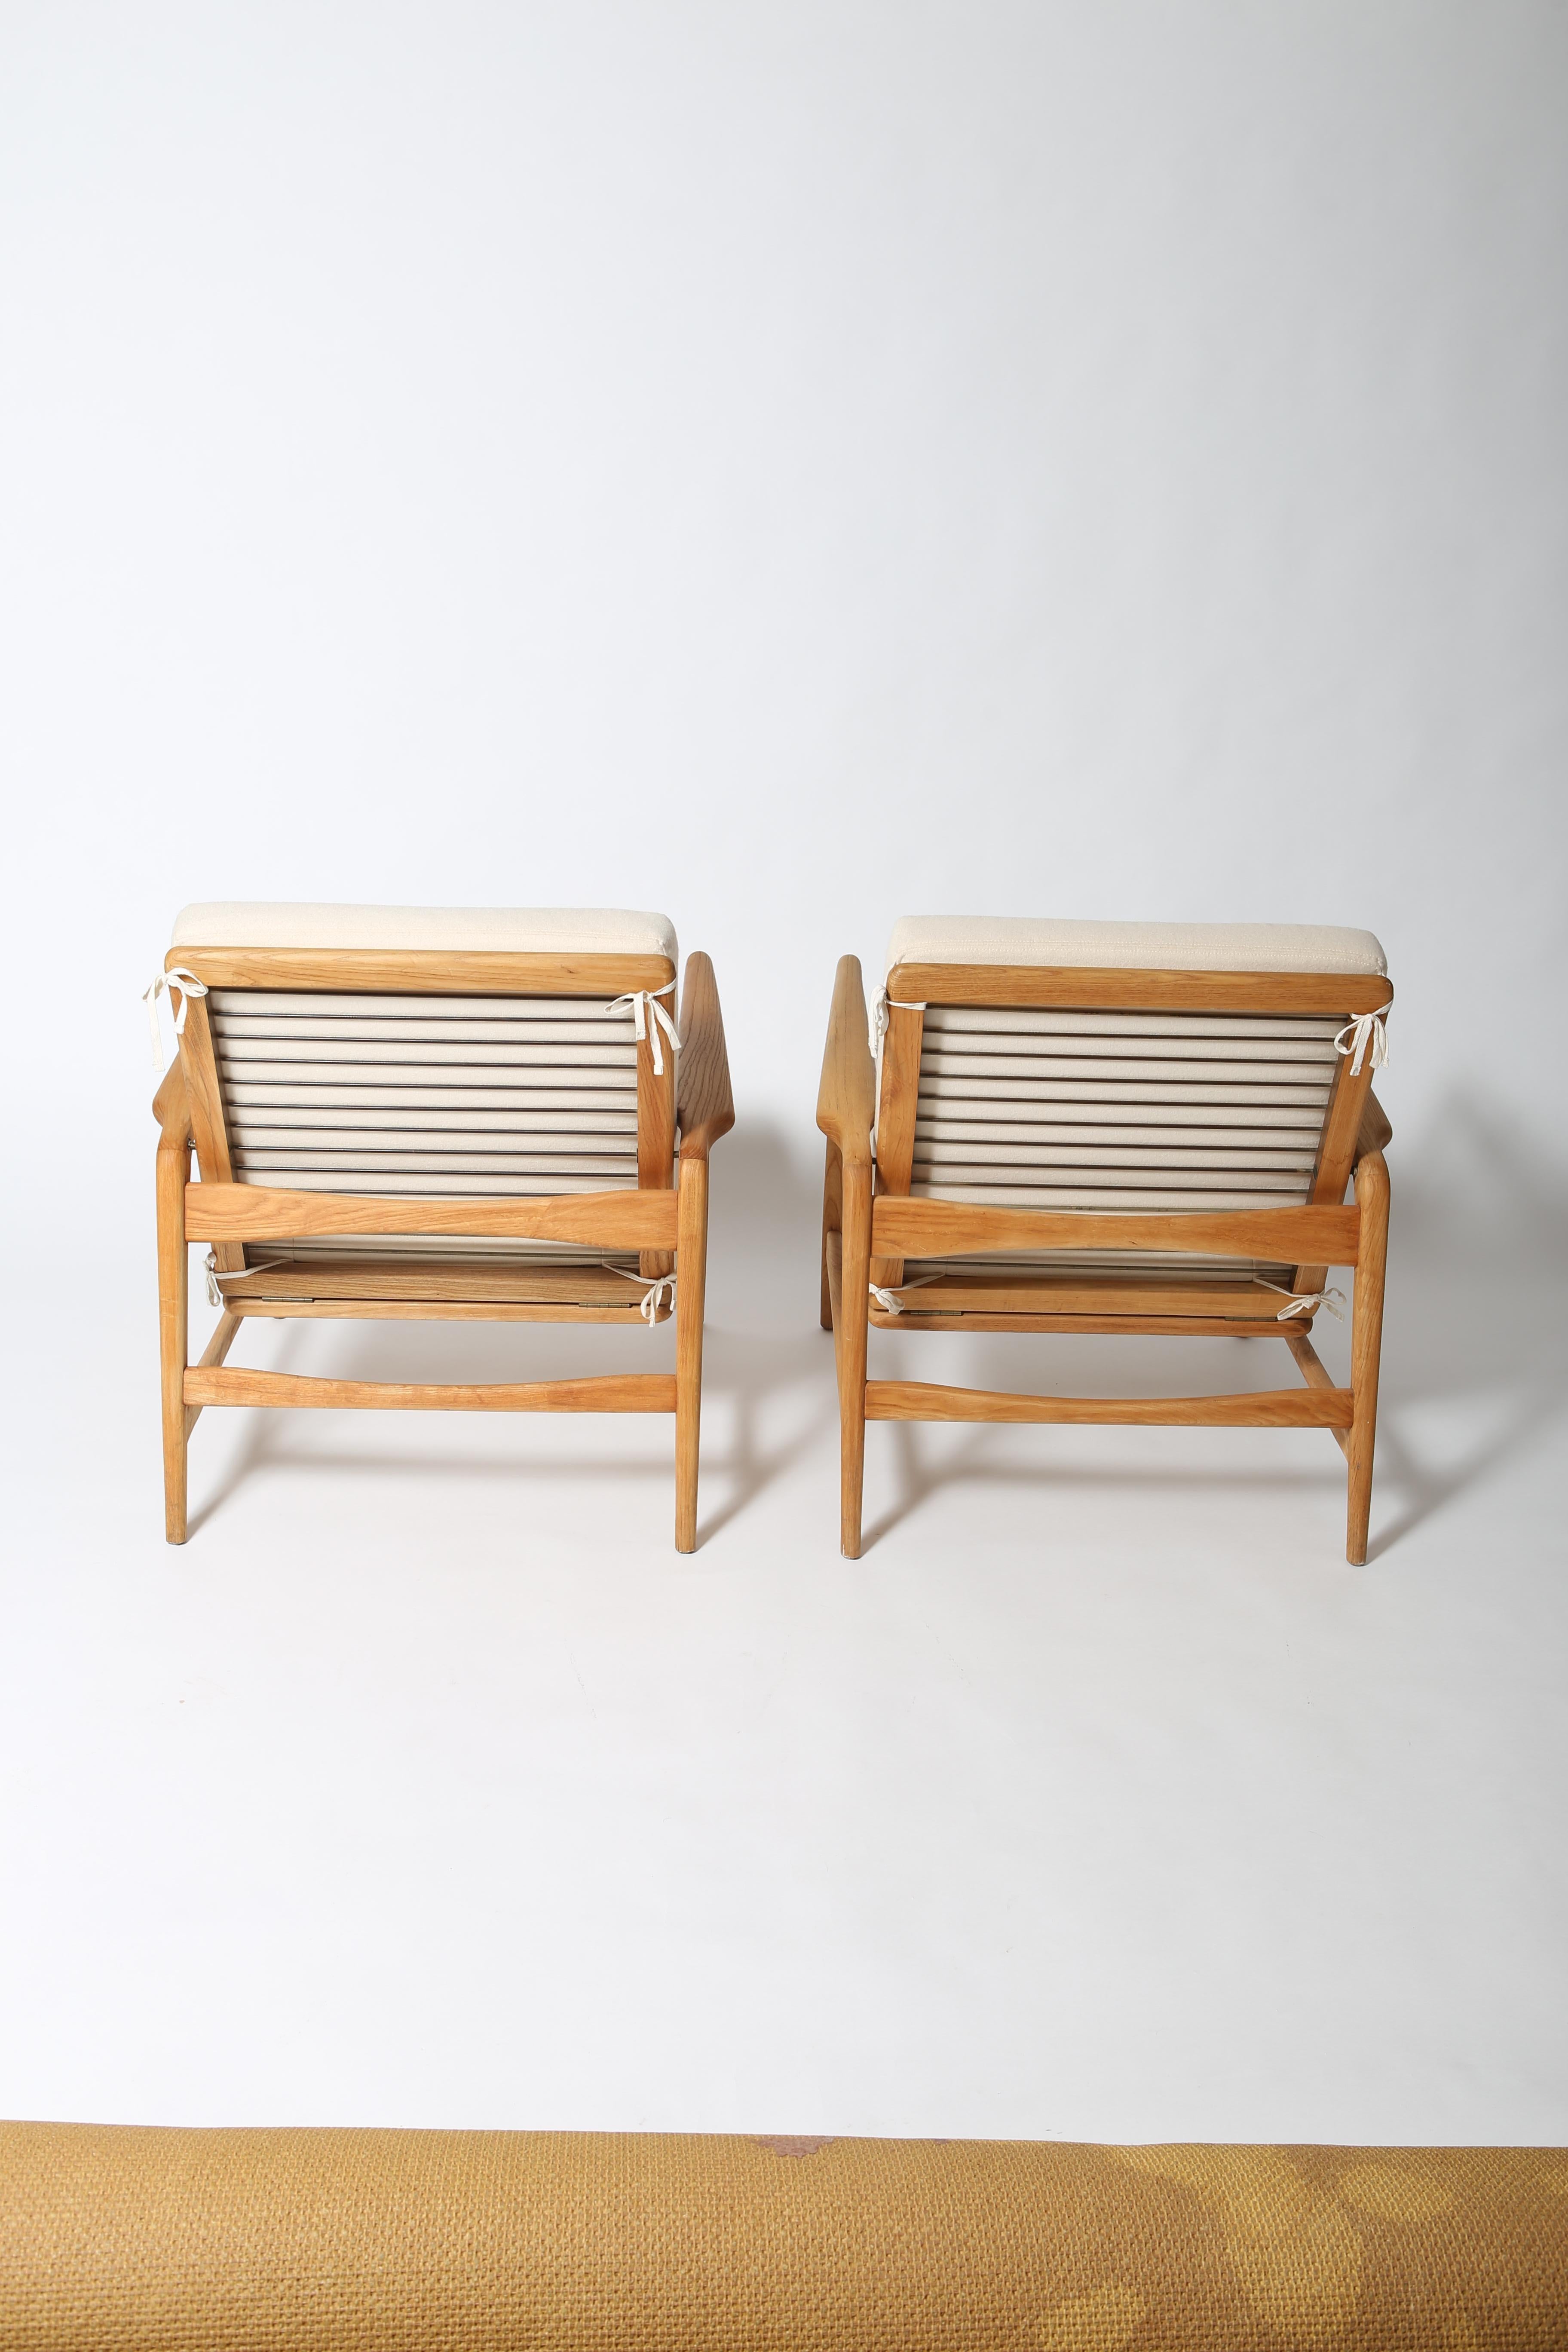 Solid wood lounge chairs in the style of Ib Kofod-Larsen made by Shield circa 1960s. 
Backrest reclines with four comfortable settings and these are fully refinished with minimal use. Ivory wool cushions include cotton ties to mitigate cushion